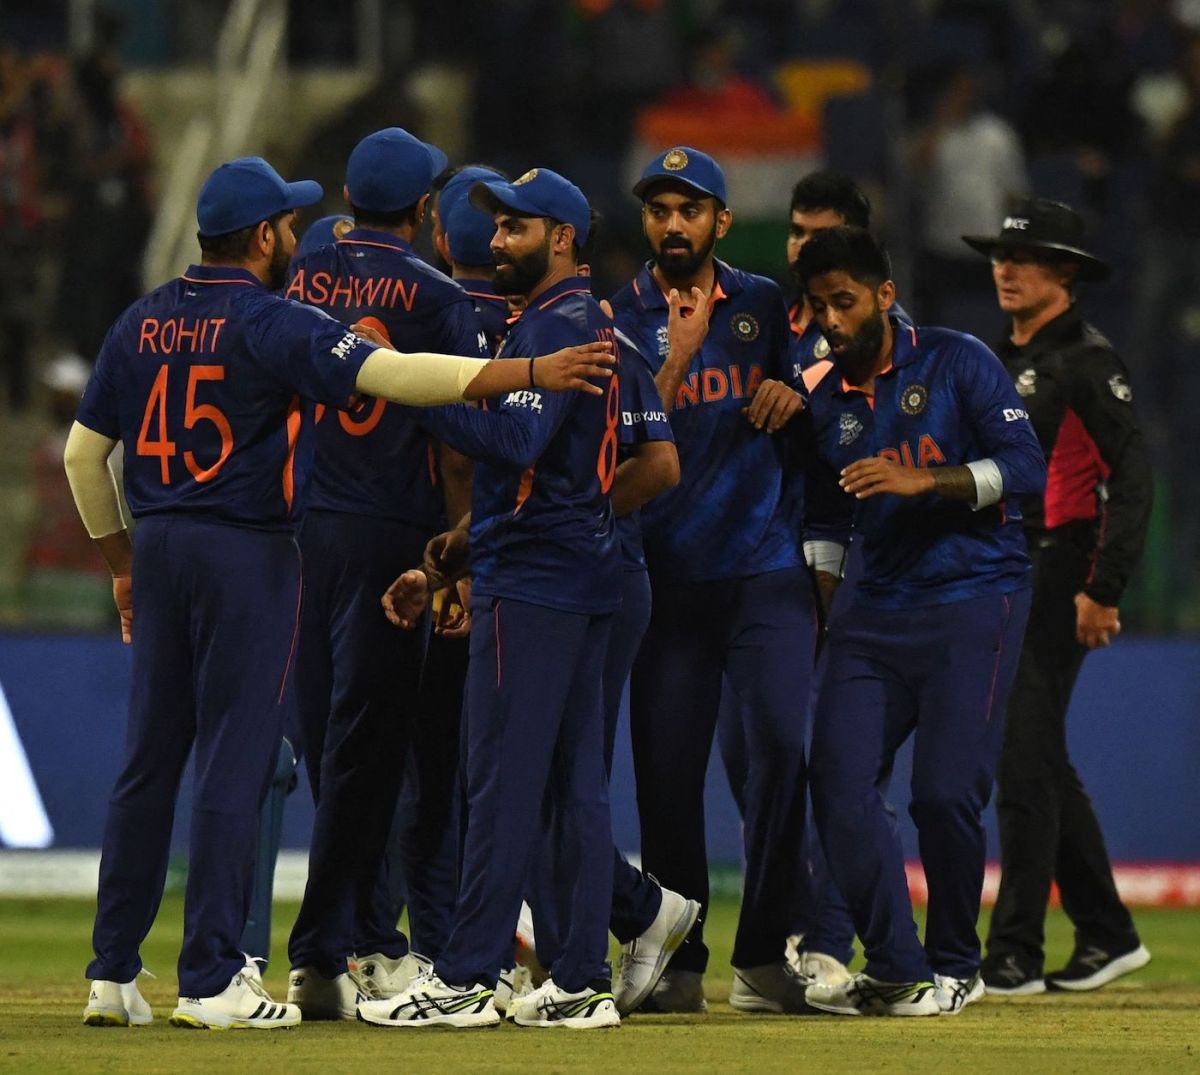 ICC T20 World Cup 2021: India vs Scotland – Who Will Win The Match?